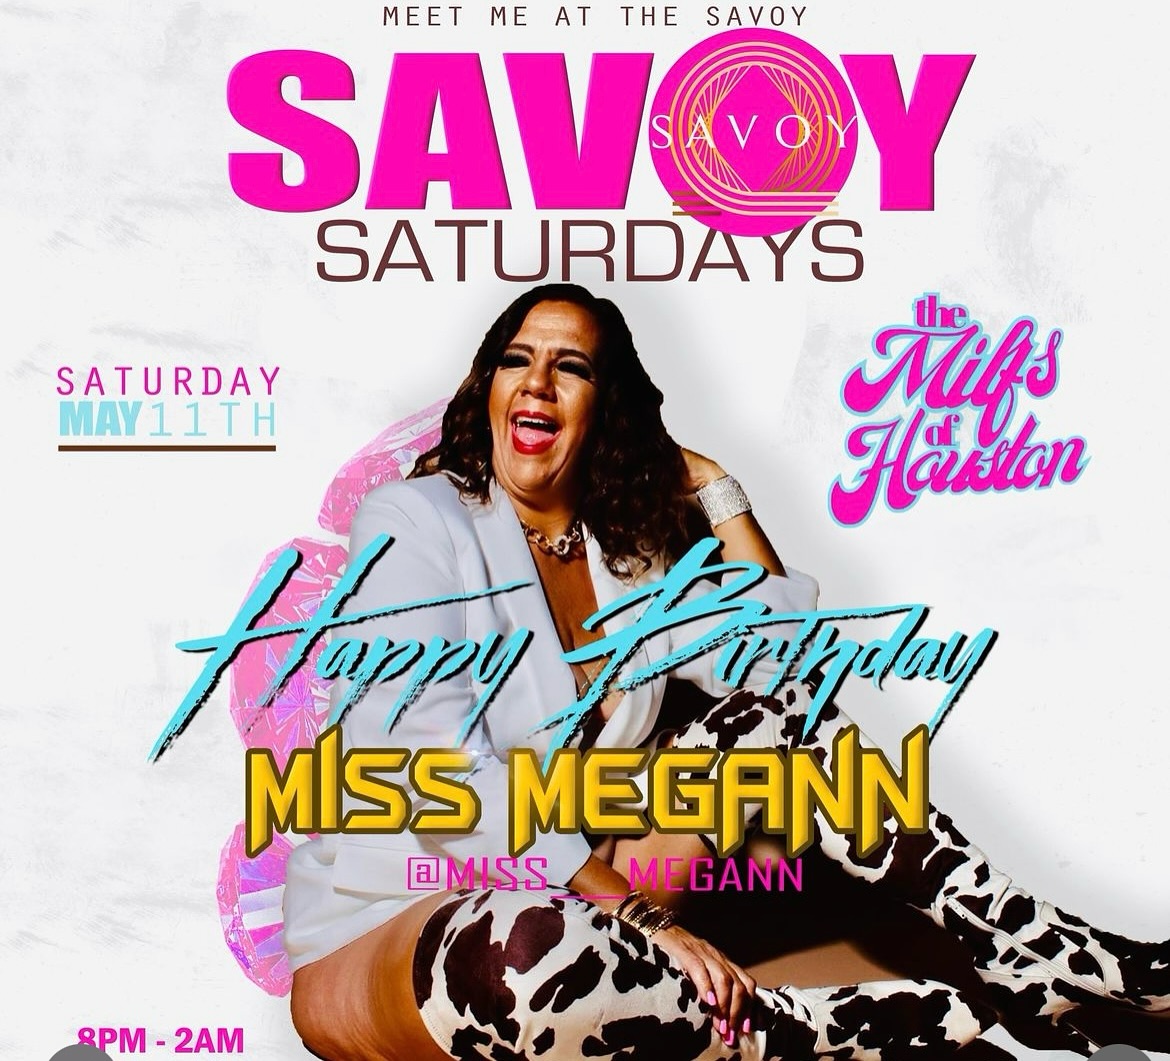 @miss____megann birthday celebration in Houston @meetmeatthesavoy tonight!
Pull up and help us  celebrate!🎉 
It’s going to be 🔥